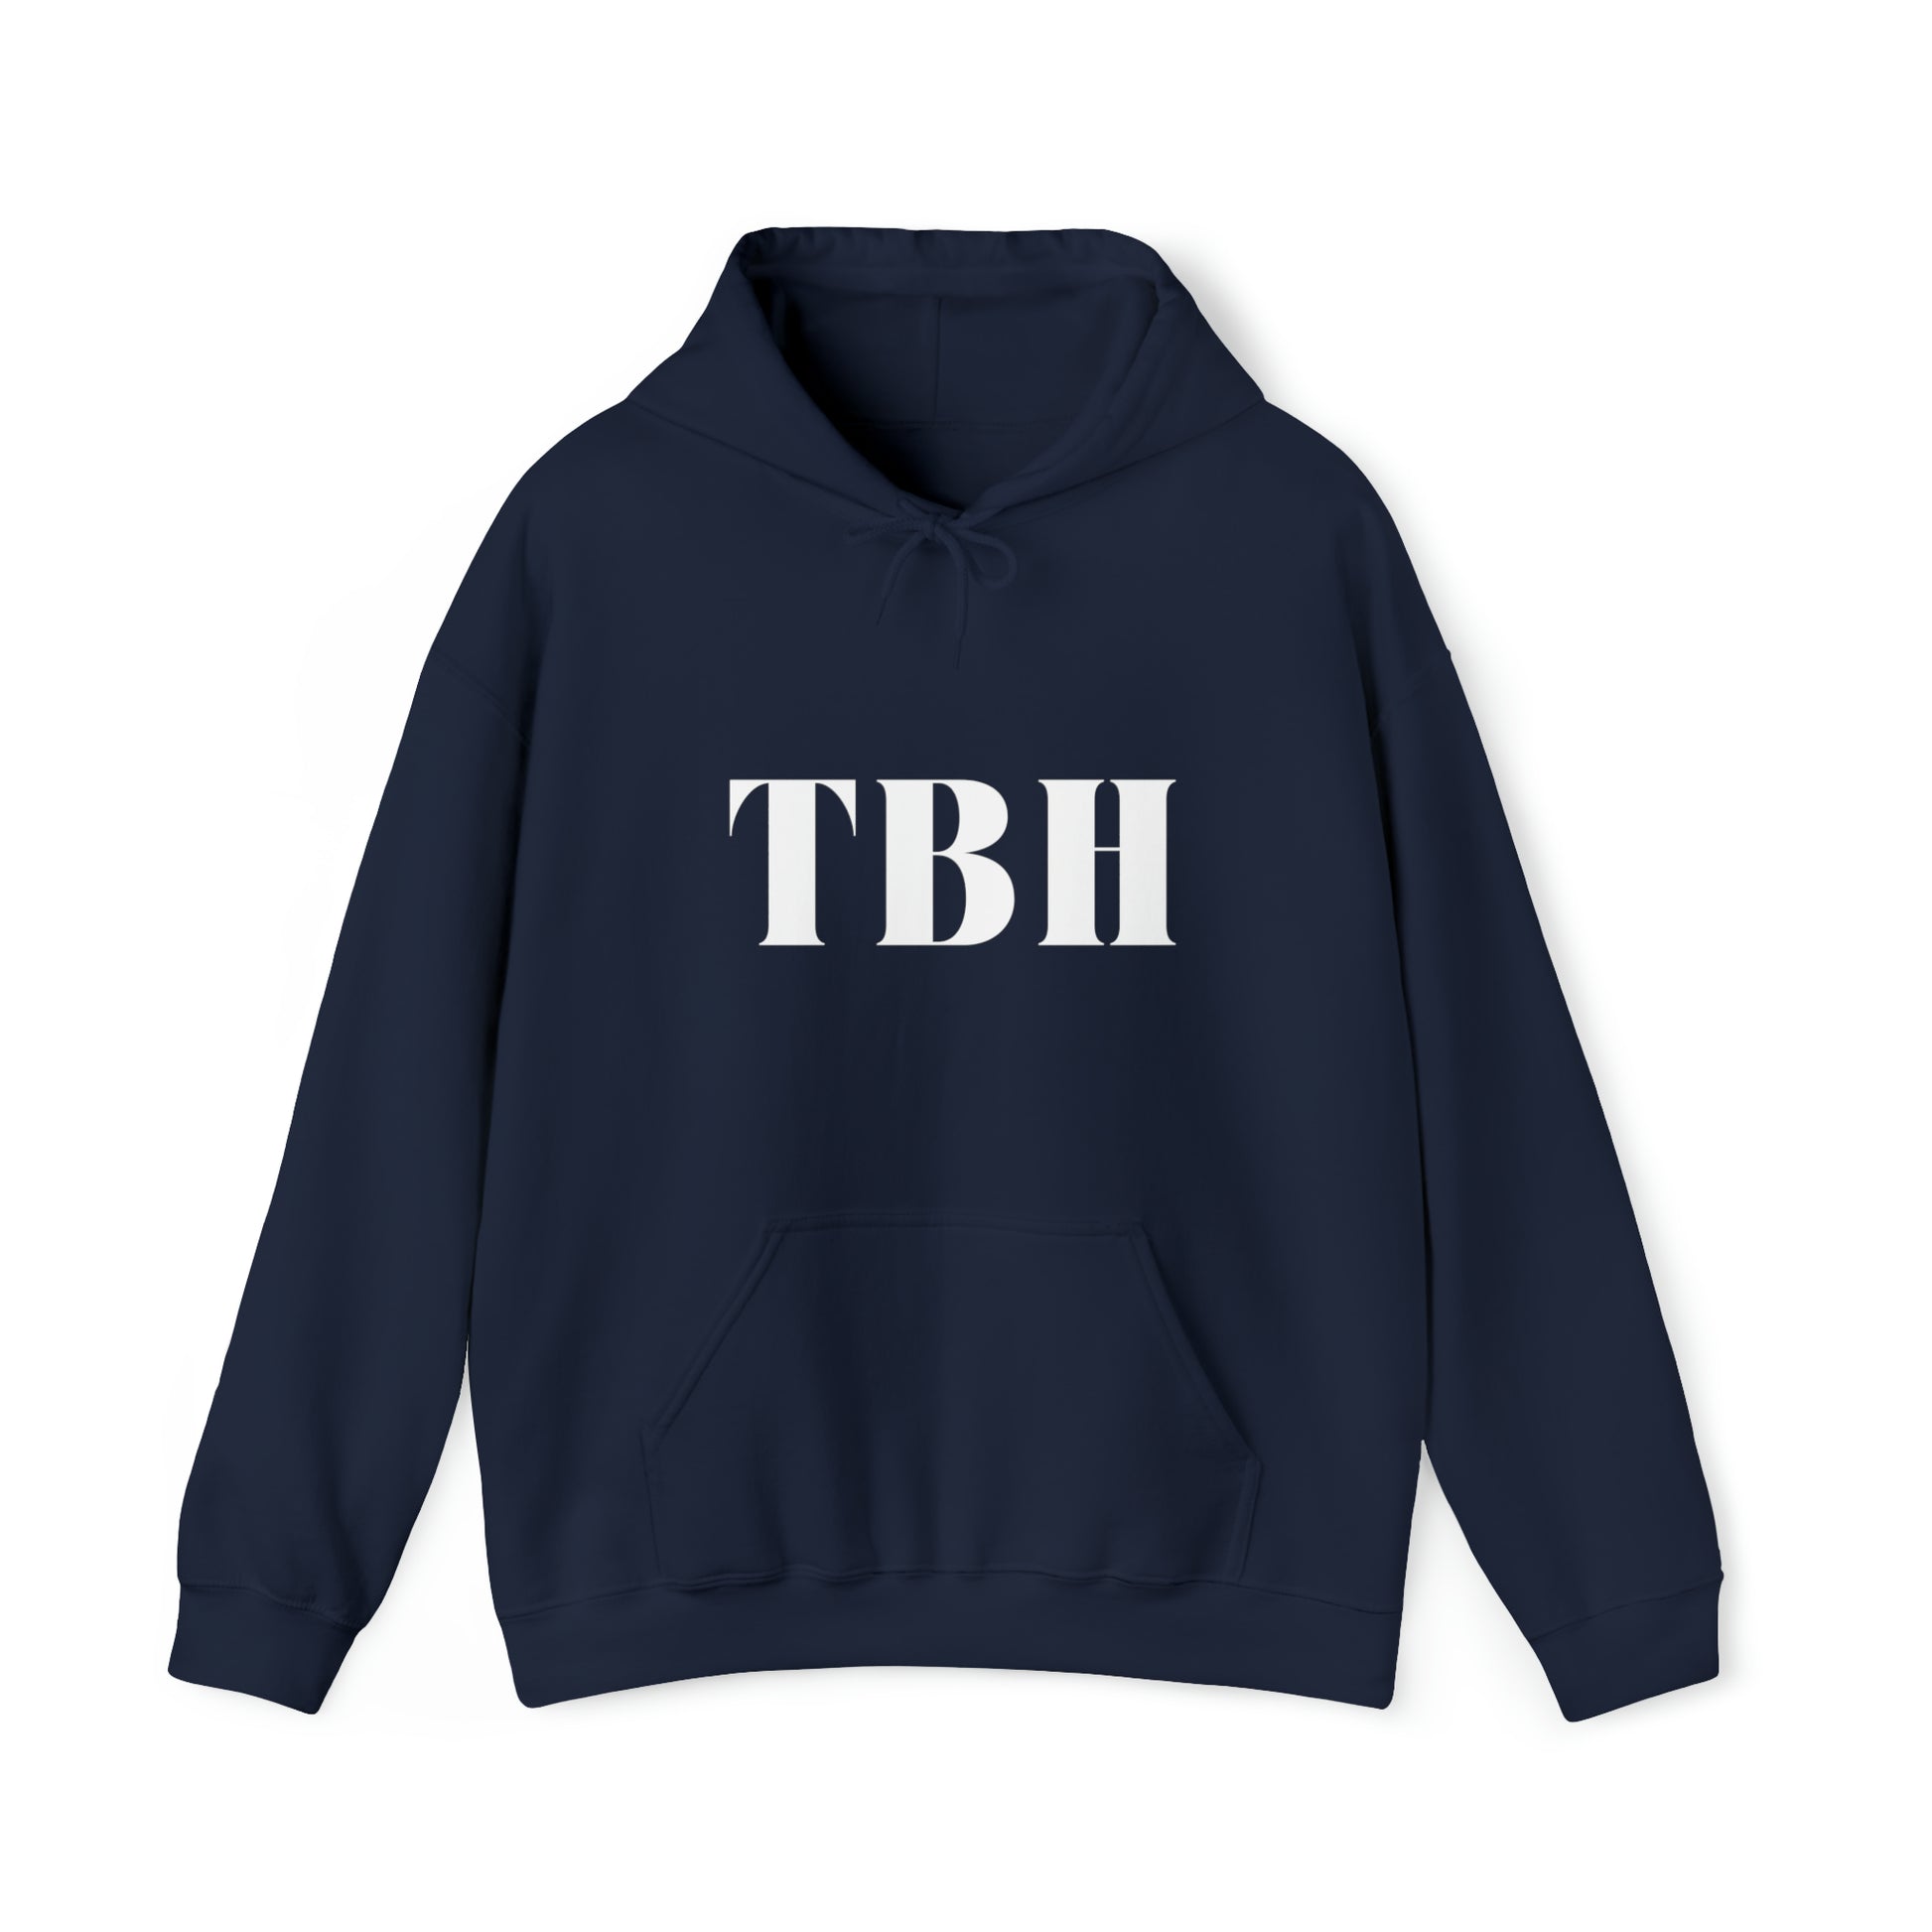 S Navy TBH Hoodie from HoodySZN.com